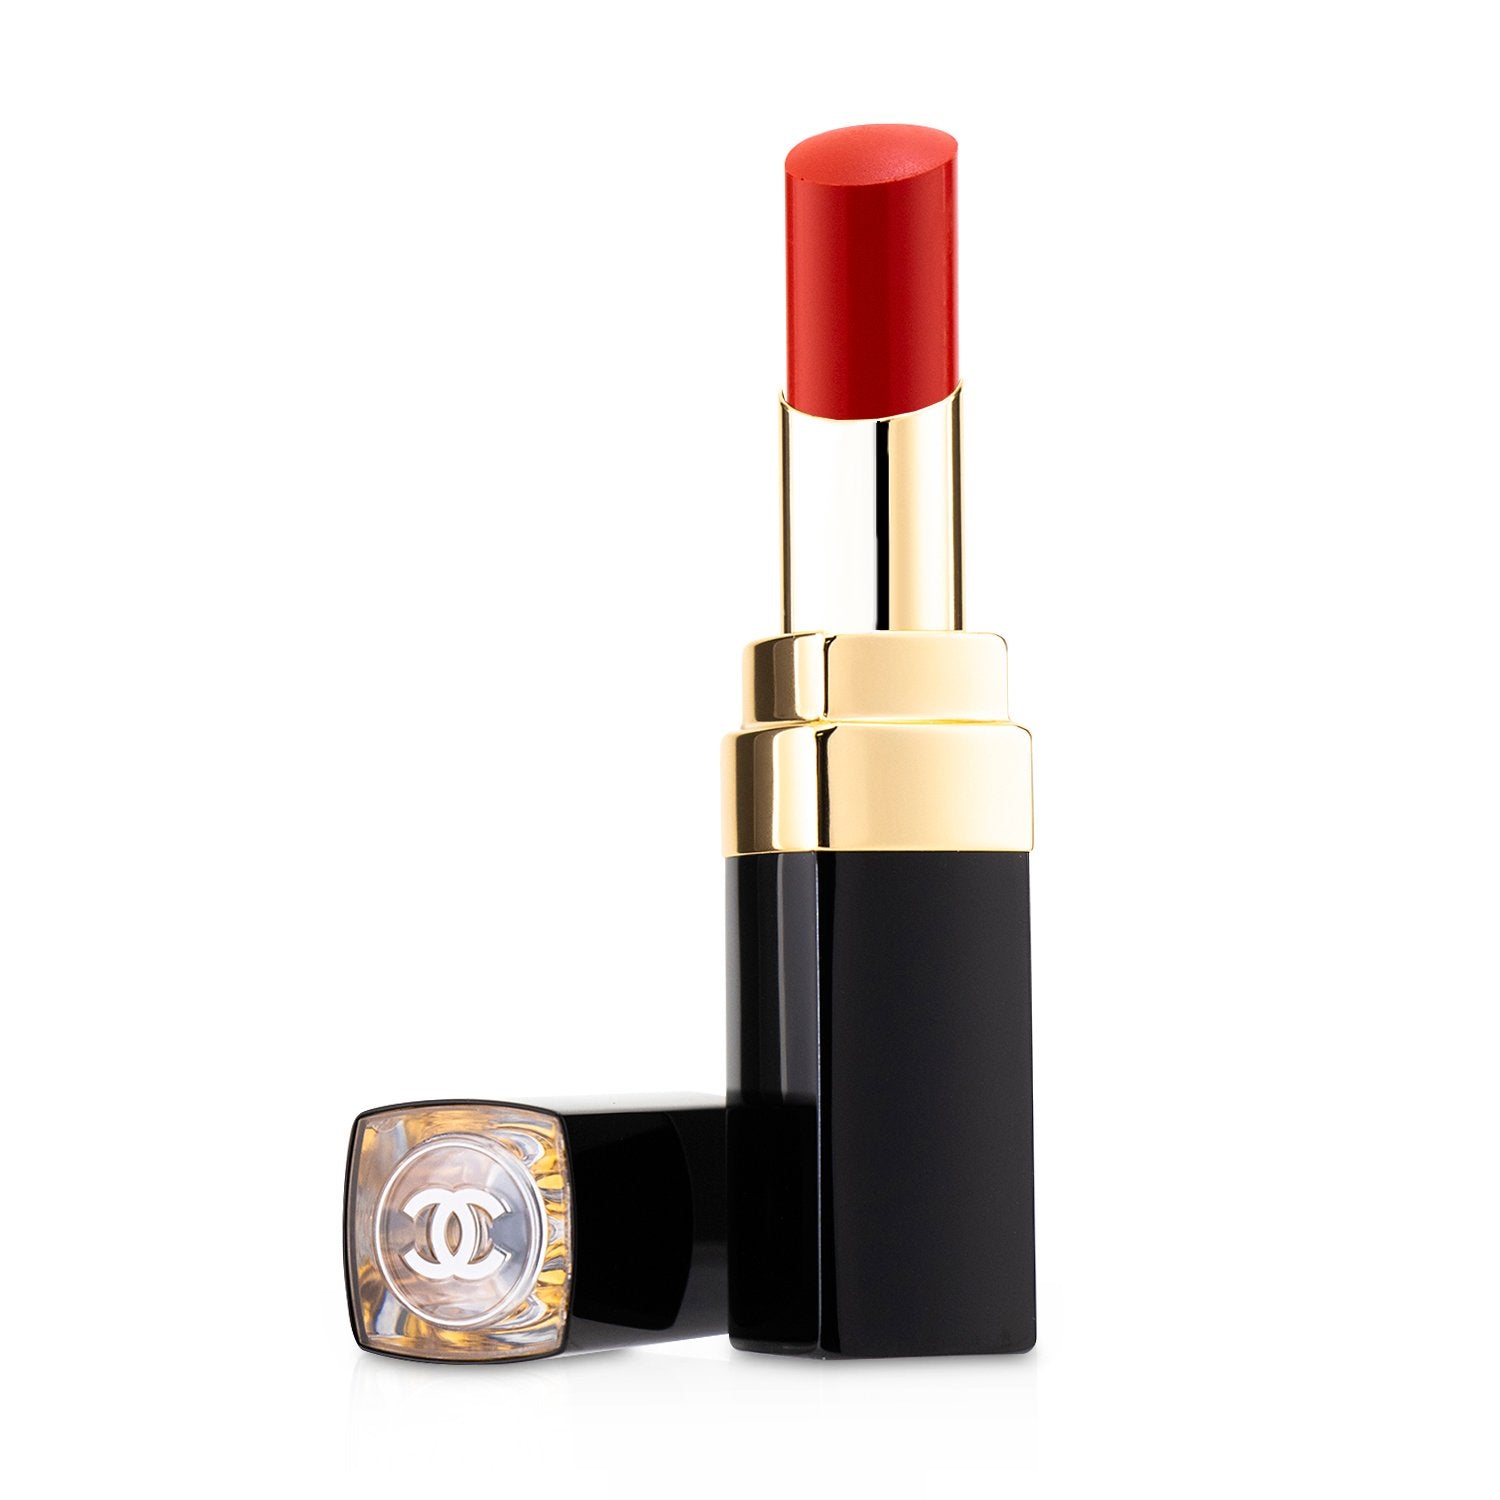 Chanel Rouge Coco Flash Lip Colour, 134 Lust, 0.1oz/3 g Ingredients and  Reviews